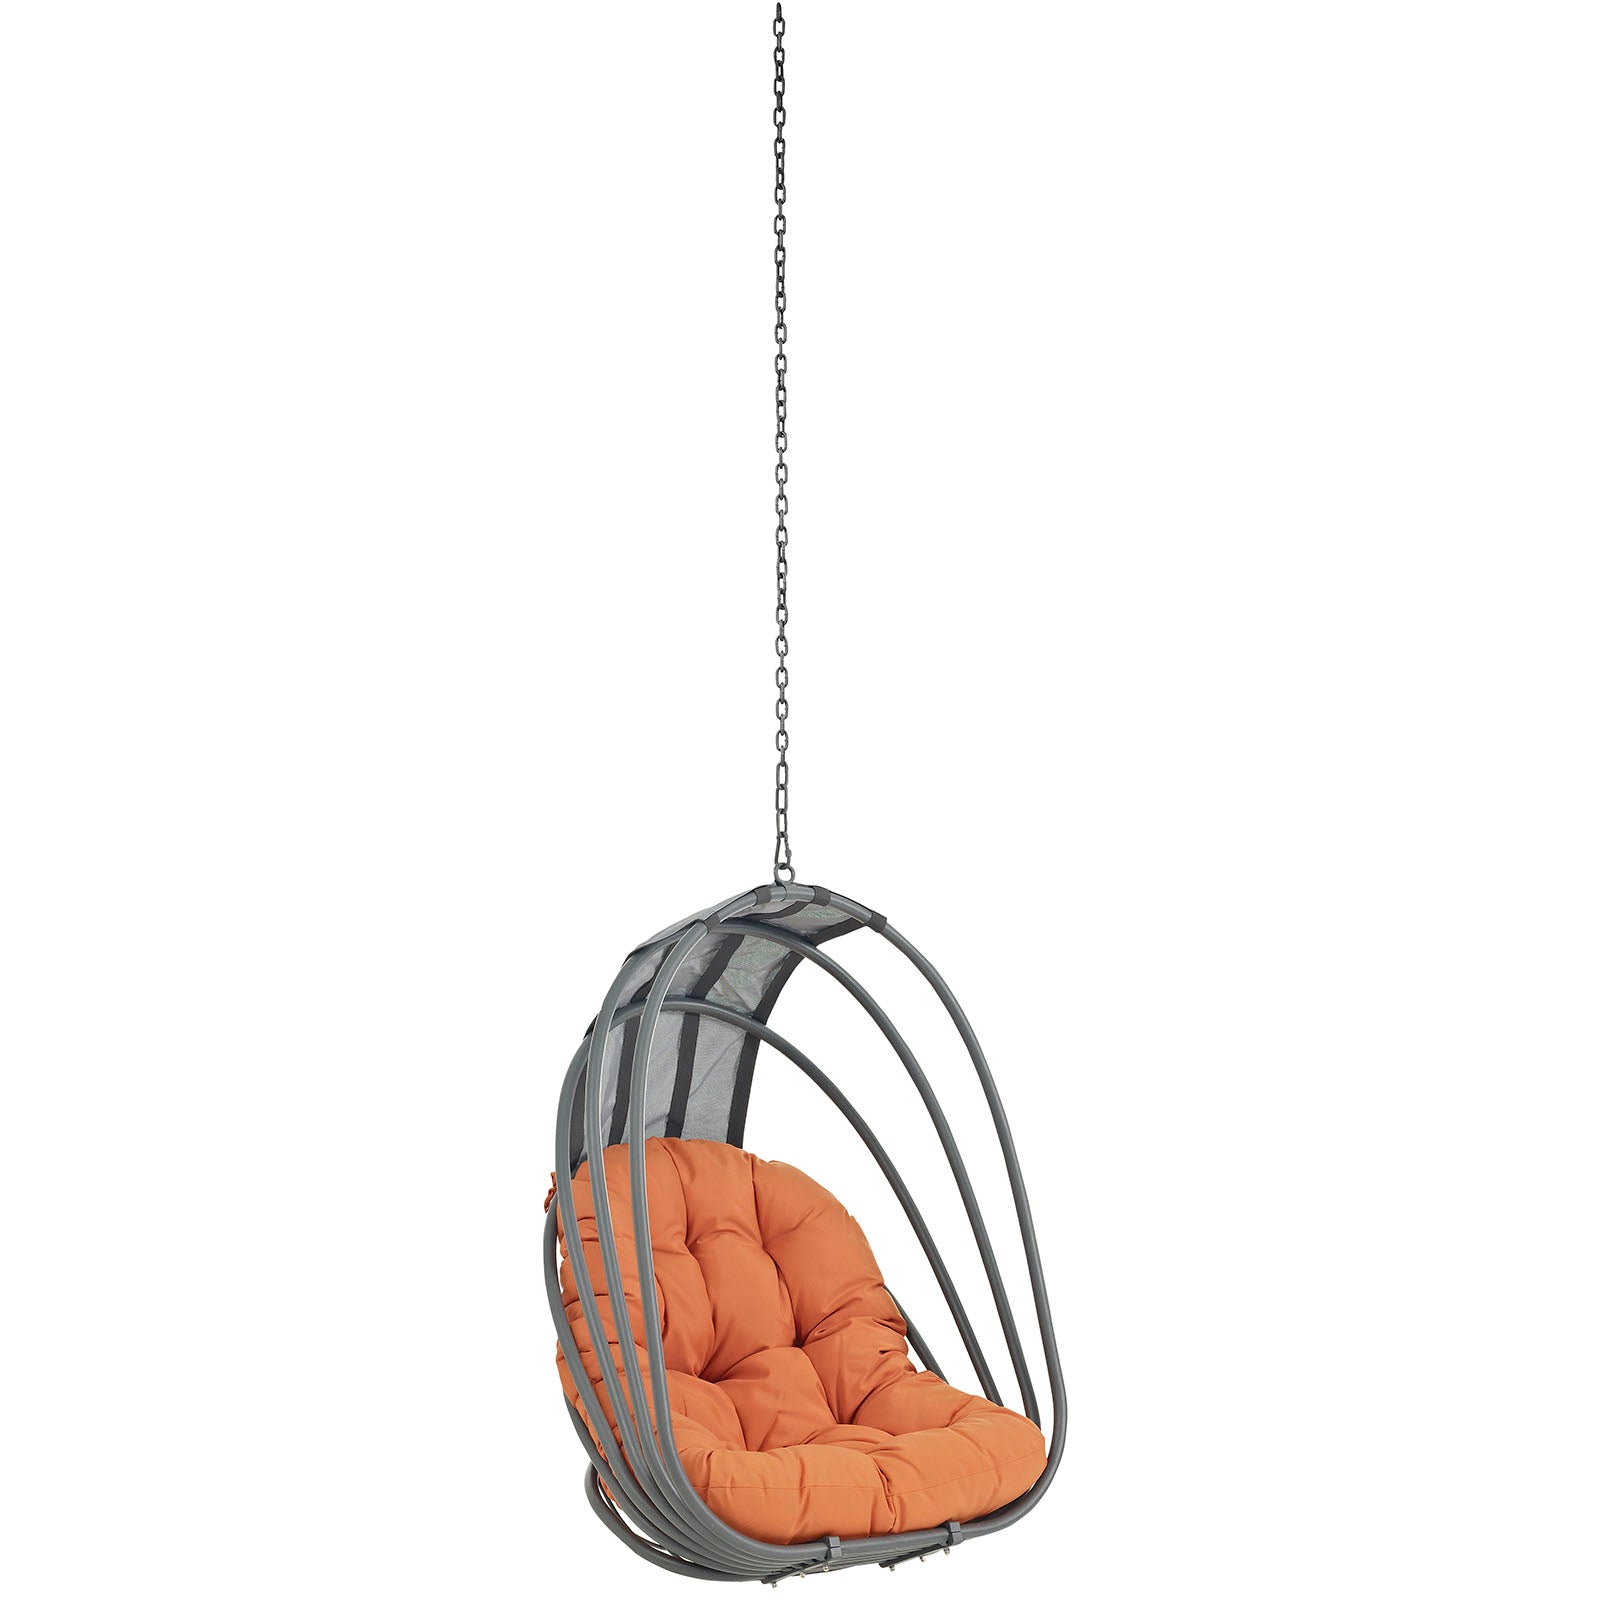 Hanging Outdoor Wicker Chair, Whish Patio Swing Chair - Swing Chair Wi